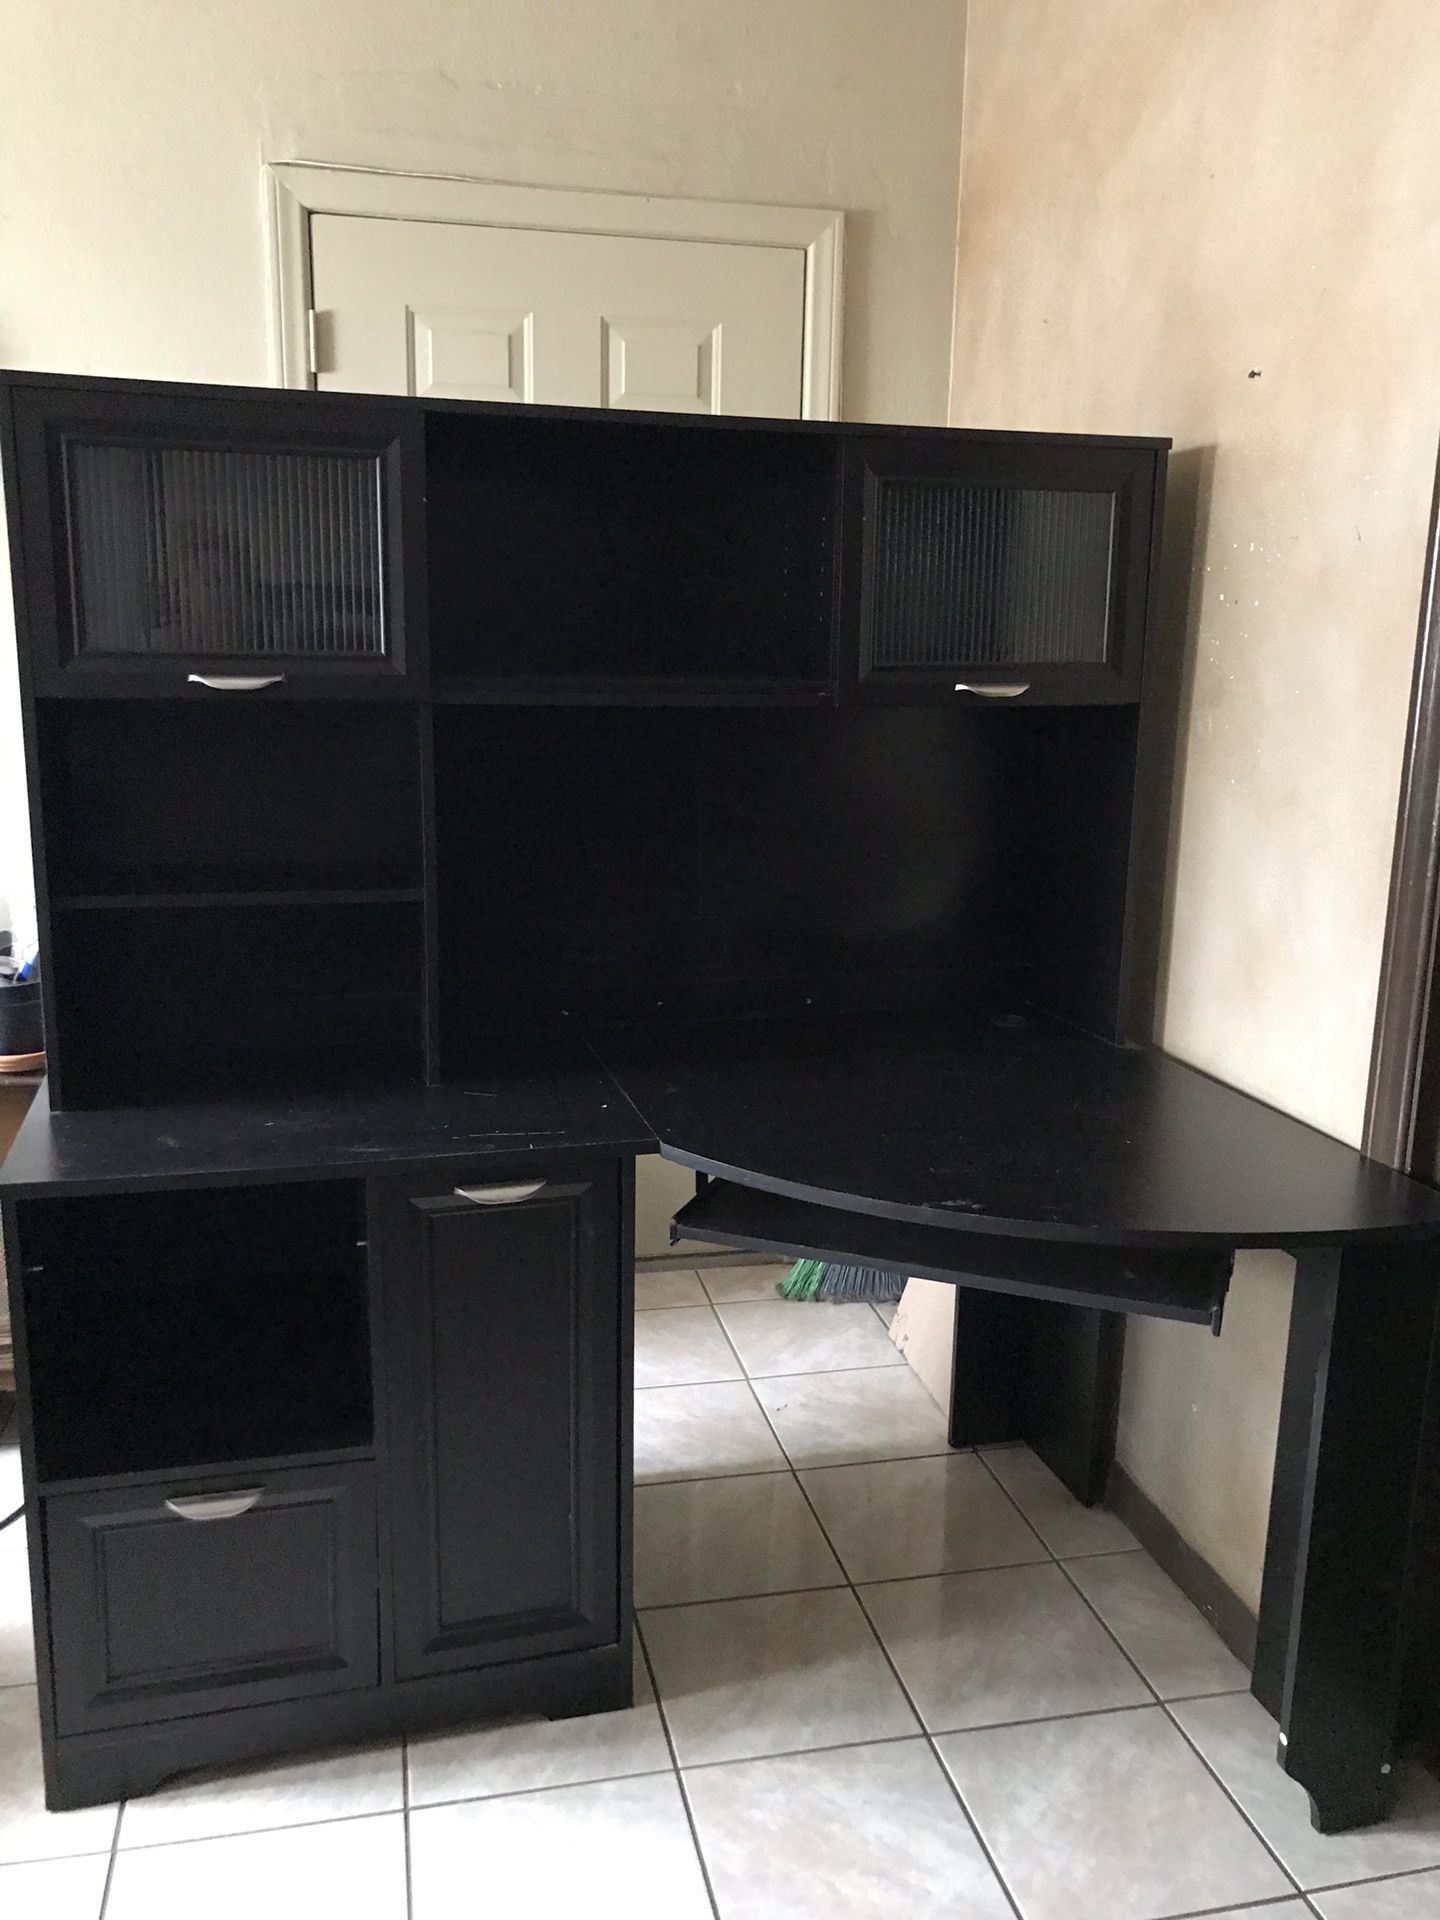 Home/office desk (used) black with top shelving